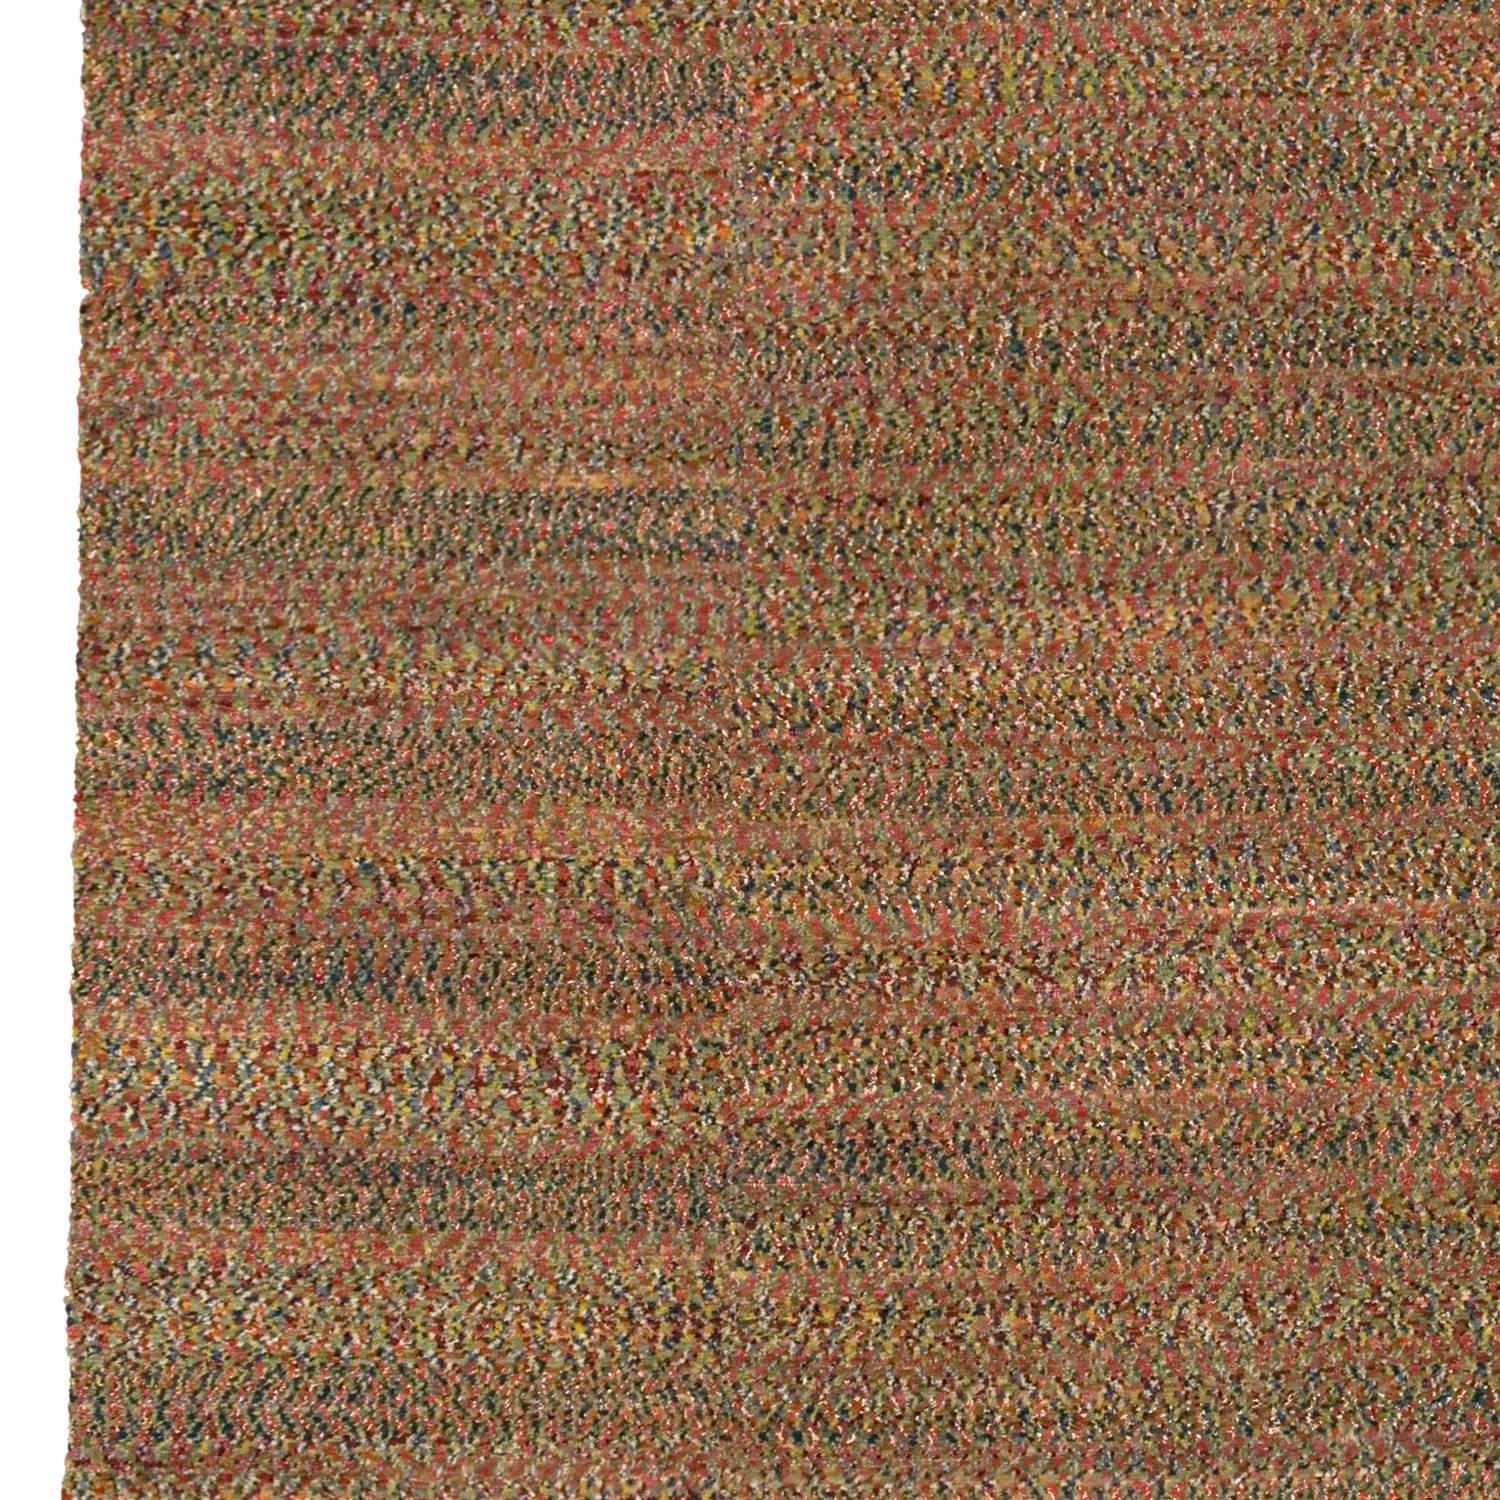 Mid 20th Century Swedish Pile-Weave Carpet In Excellent Condition For Sale In New York, NY